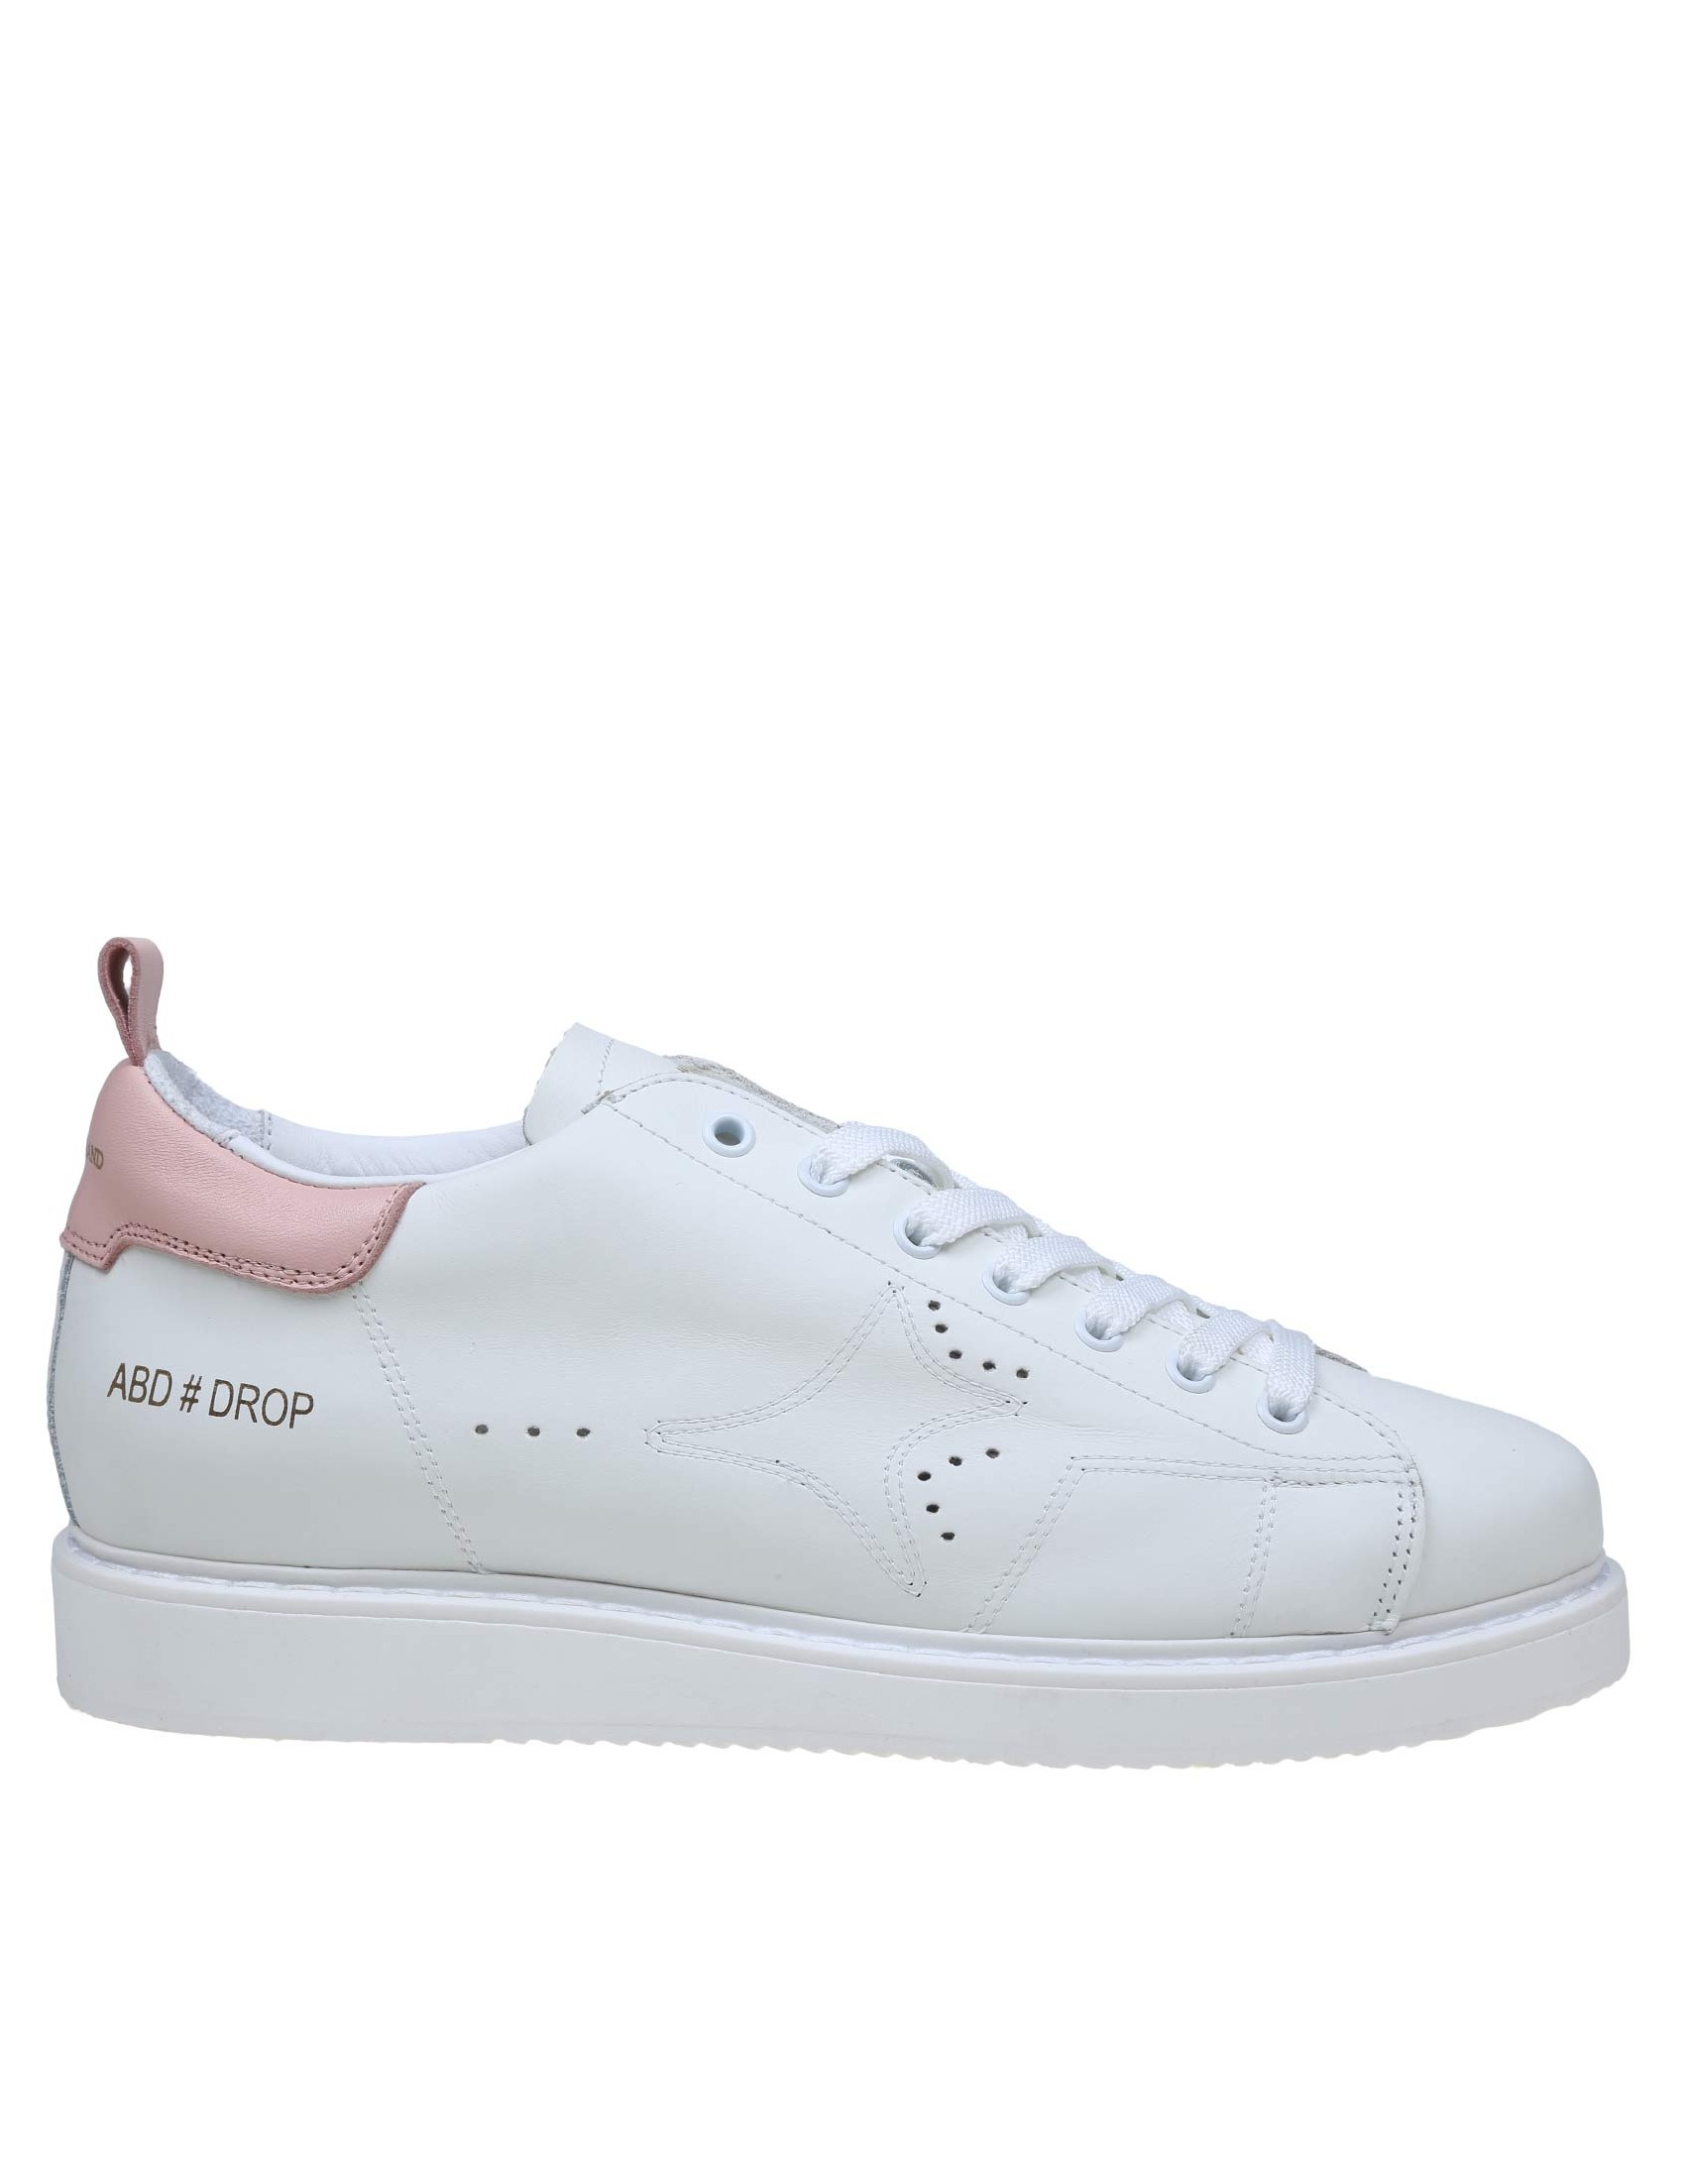 AMA BRAND WHITE AND PINK LEATHER SNEAKERS